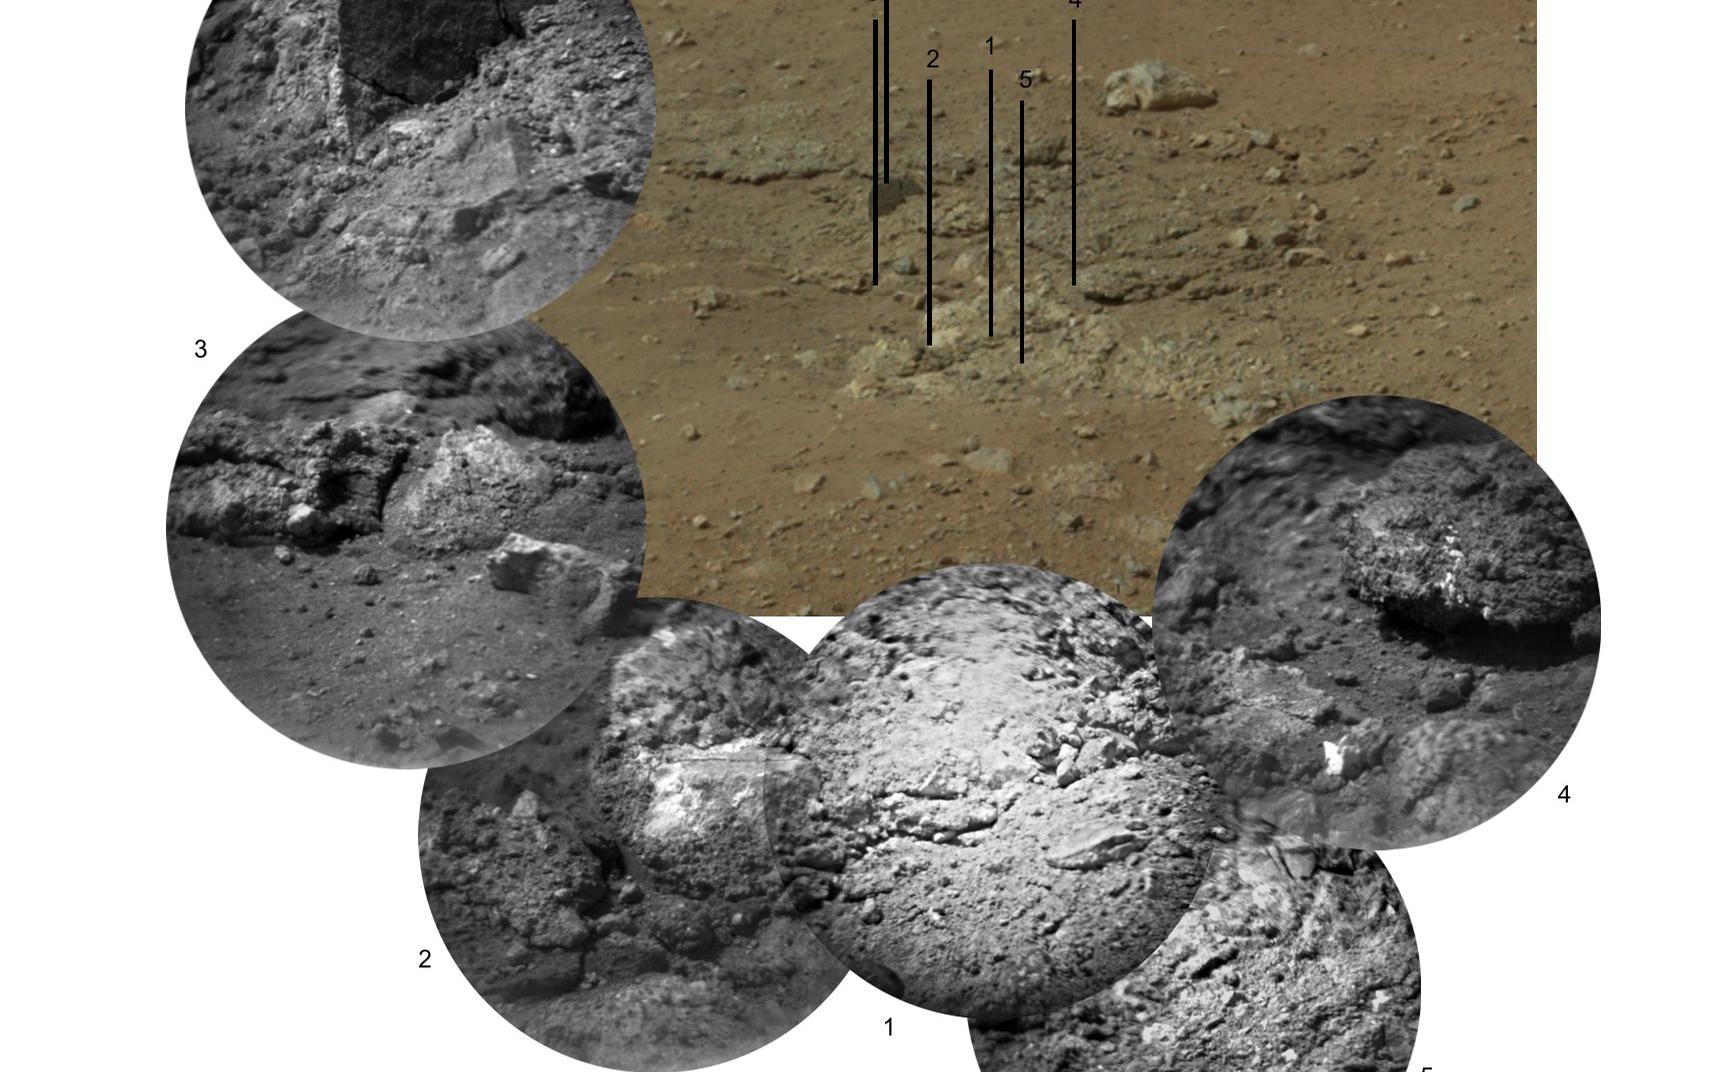 This photo mosaic shows the scour mark, dubbed Goulburn, left by the thrusters on the sky crane that helped lower NASA's Curiosity rover to the Red Planet.